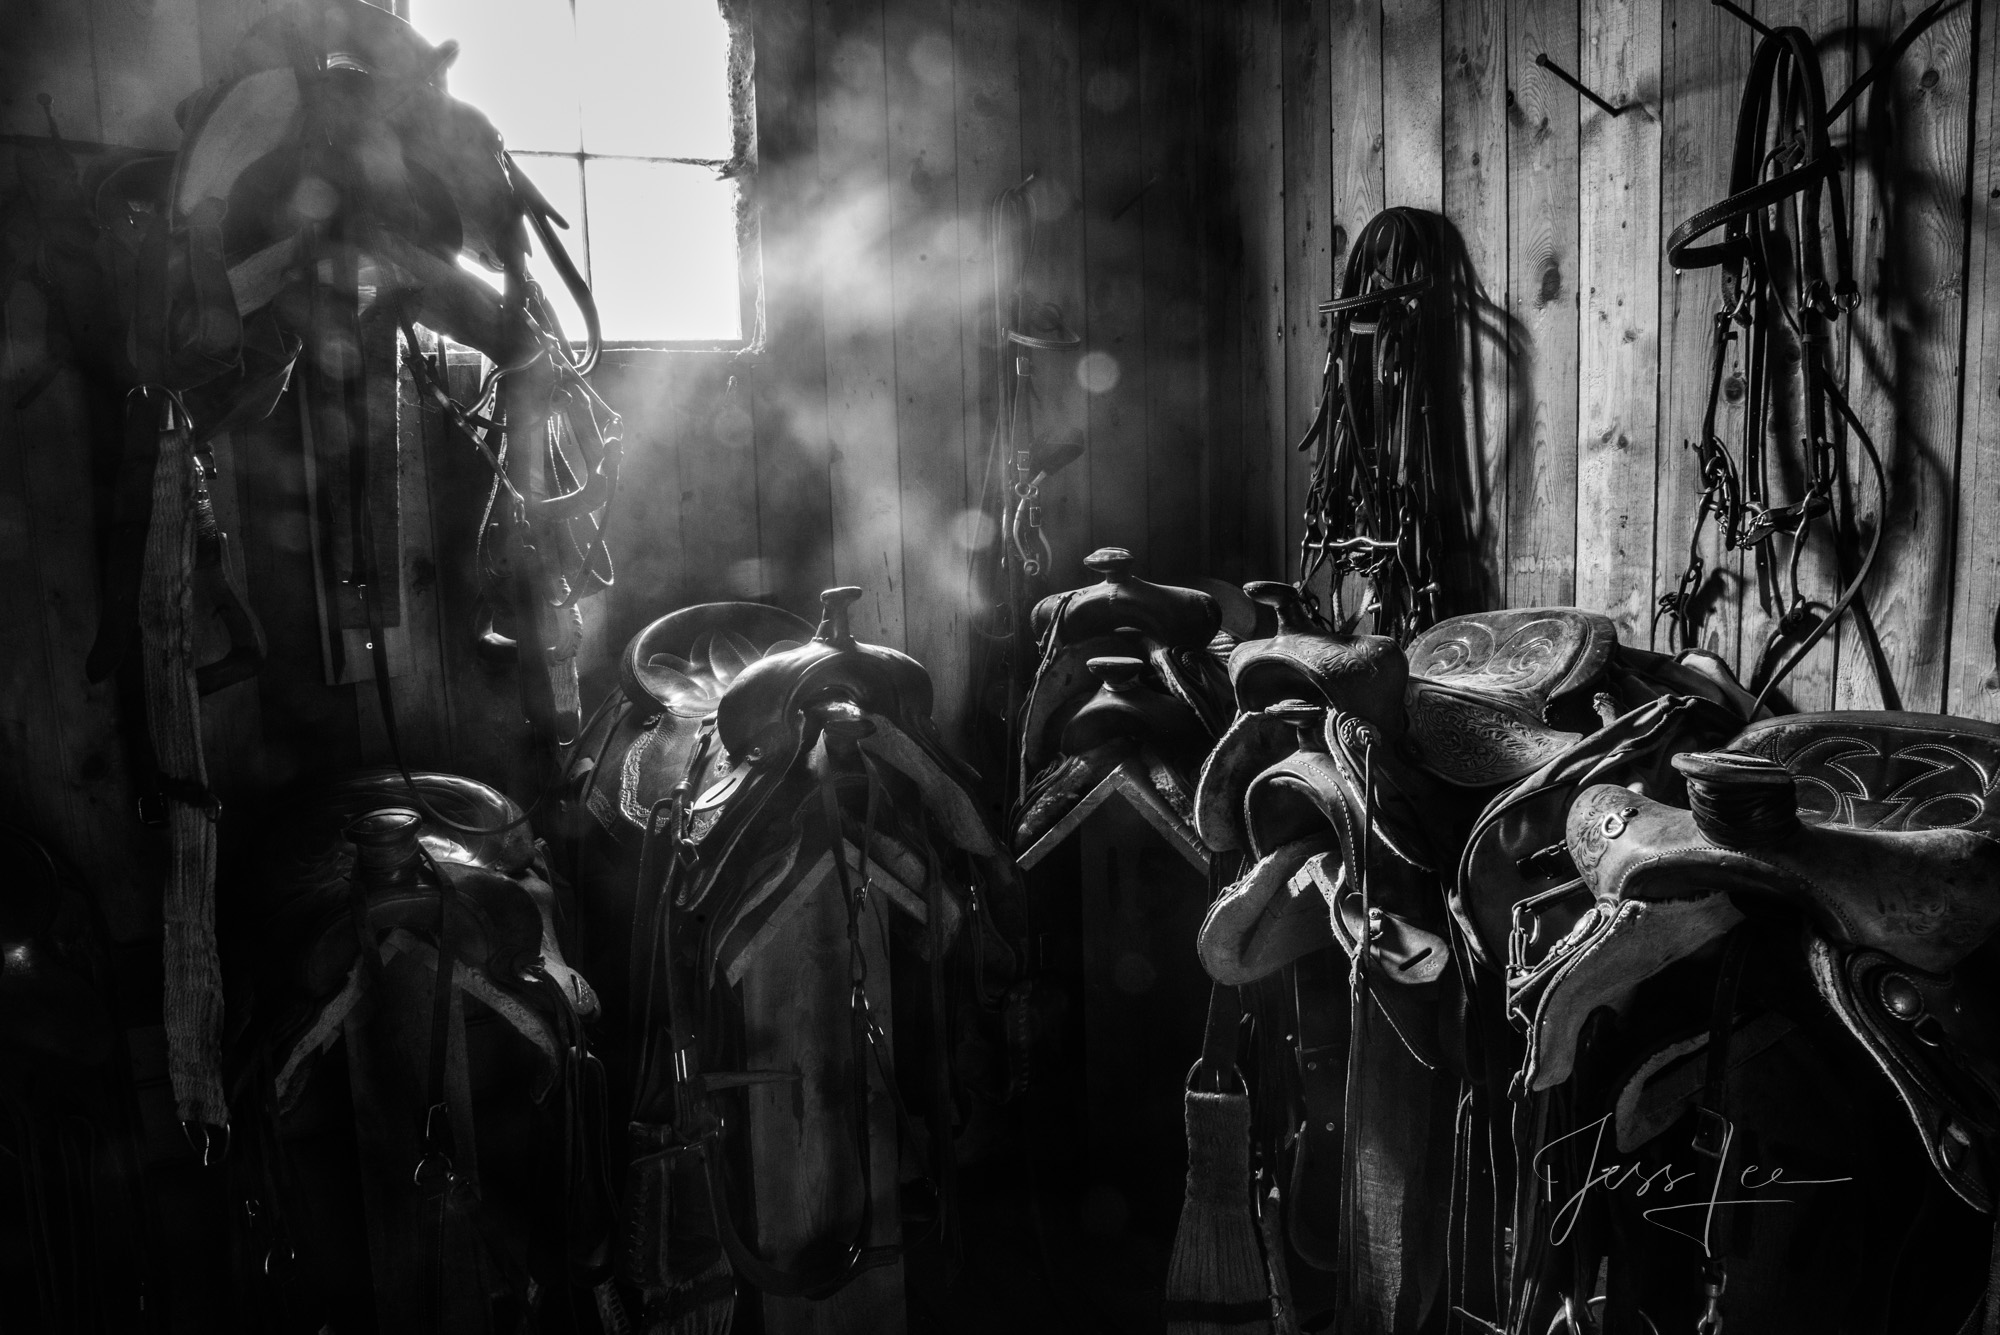 Fine Art Limited Edition Photo Prints of Cowboys, Horses, and life in the West. Ghost of the Tack Room a Cowboy picture in black...